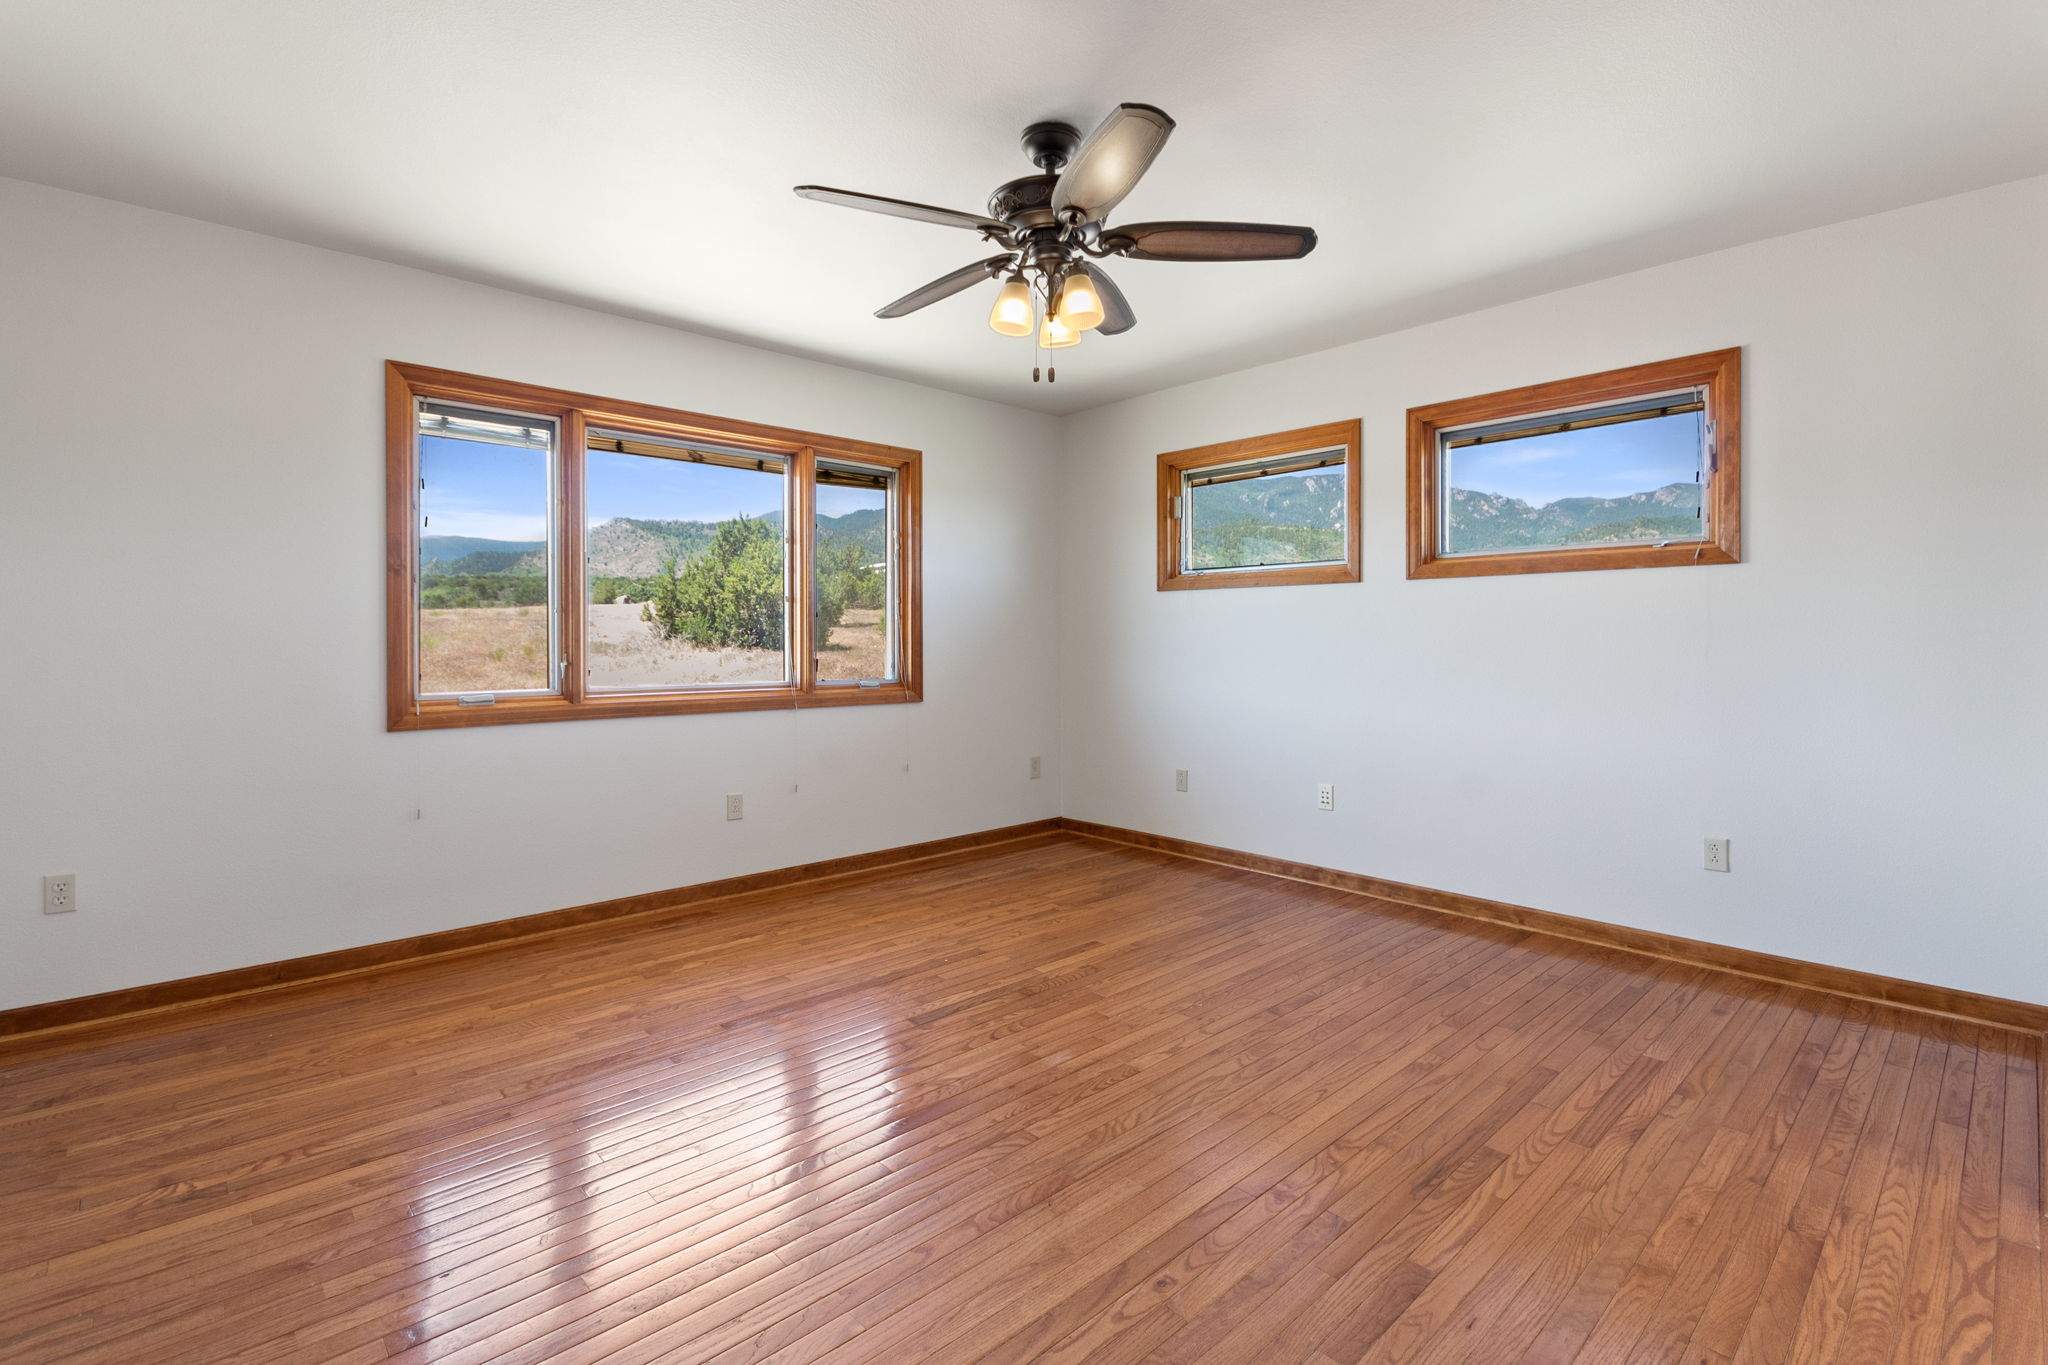  460 Co Rd 290, Florence, CO 81226, US Photo 28